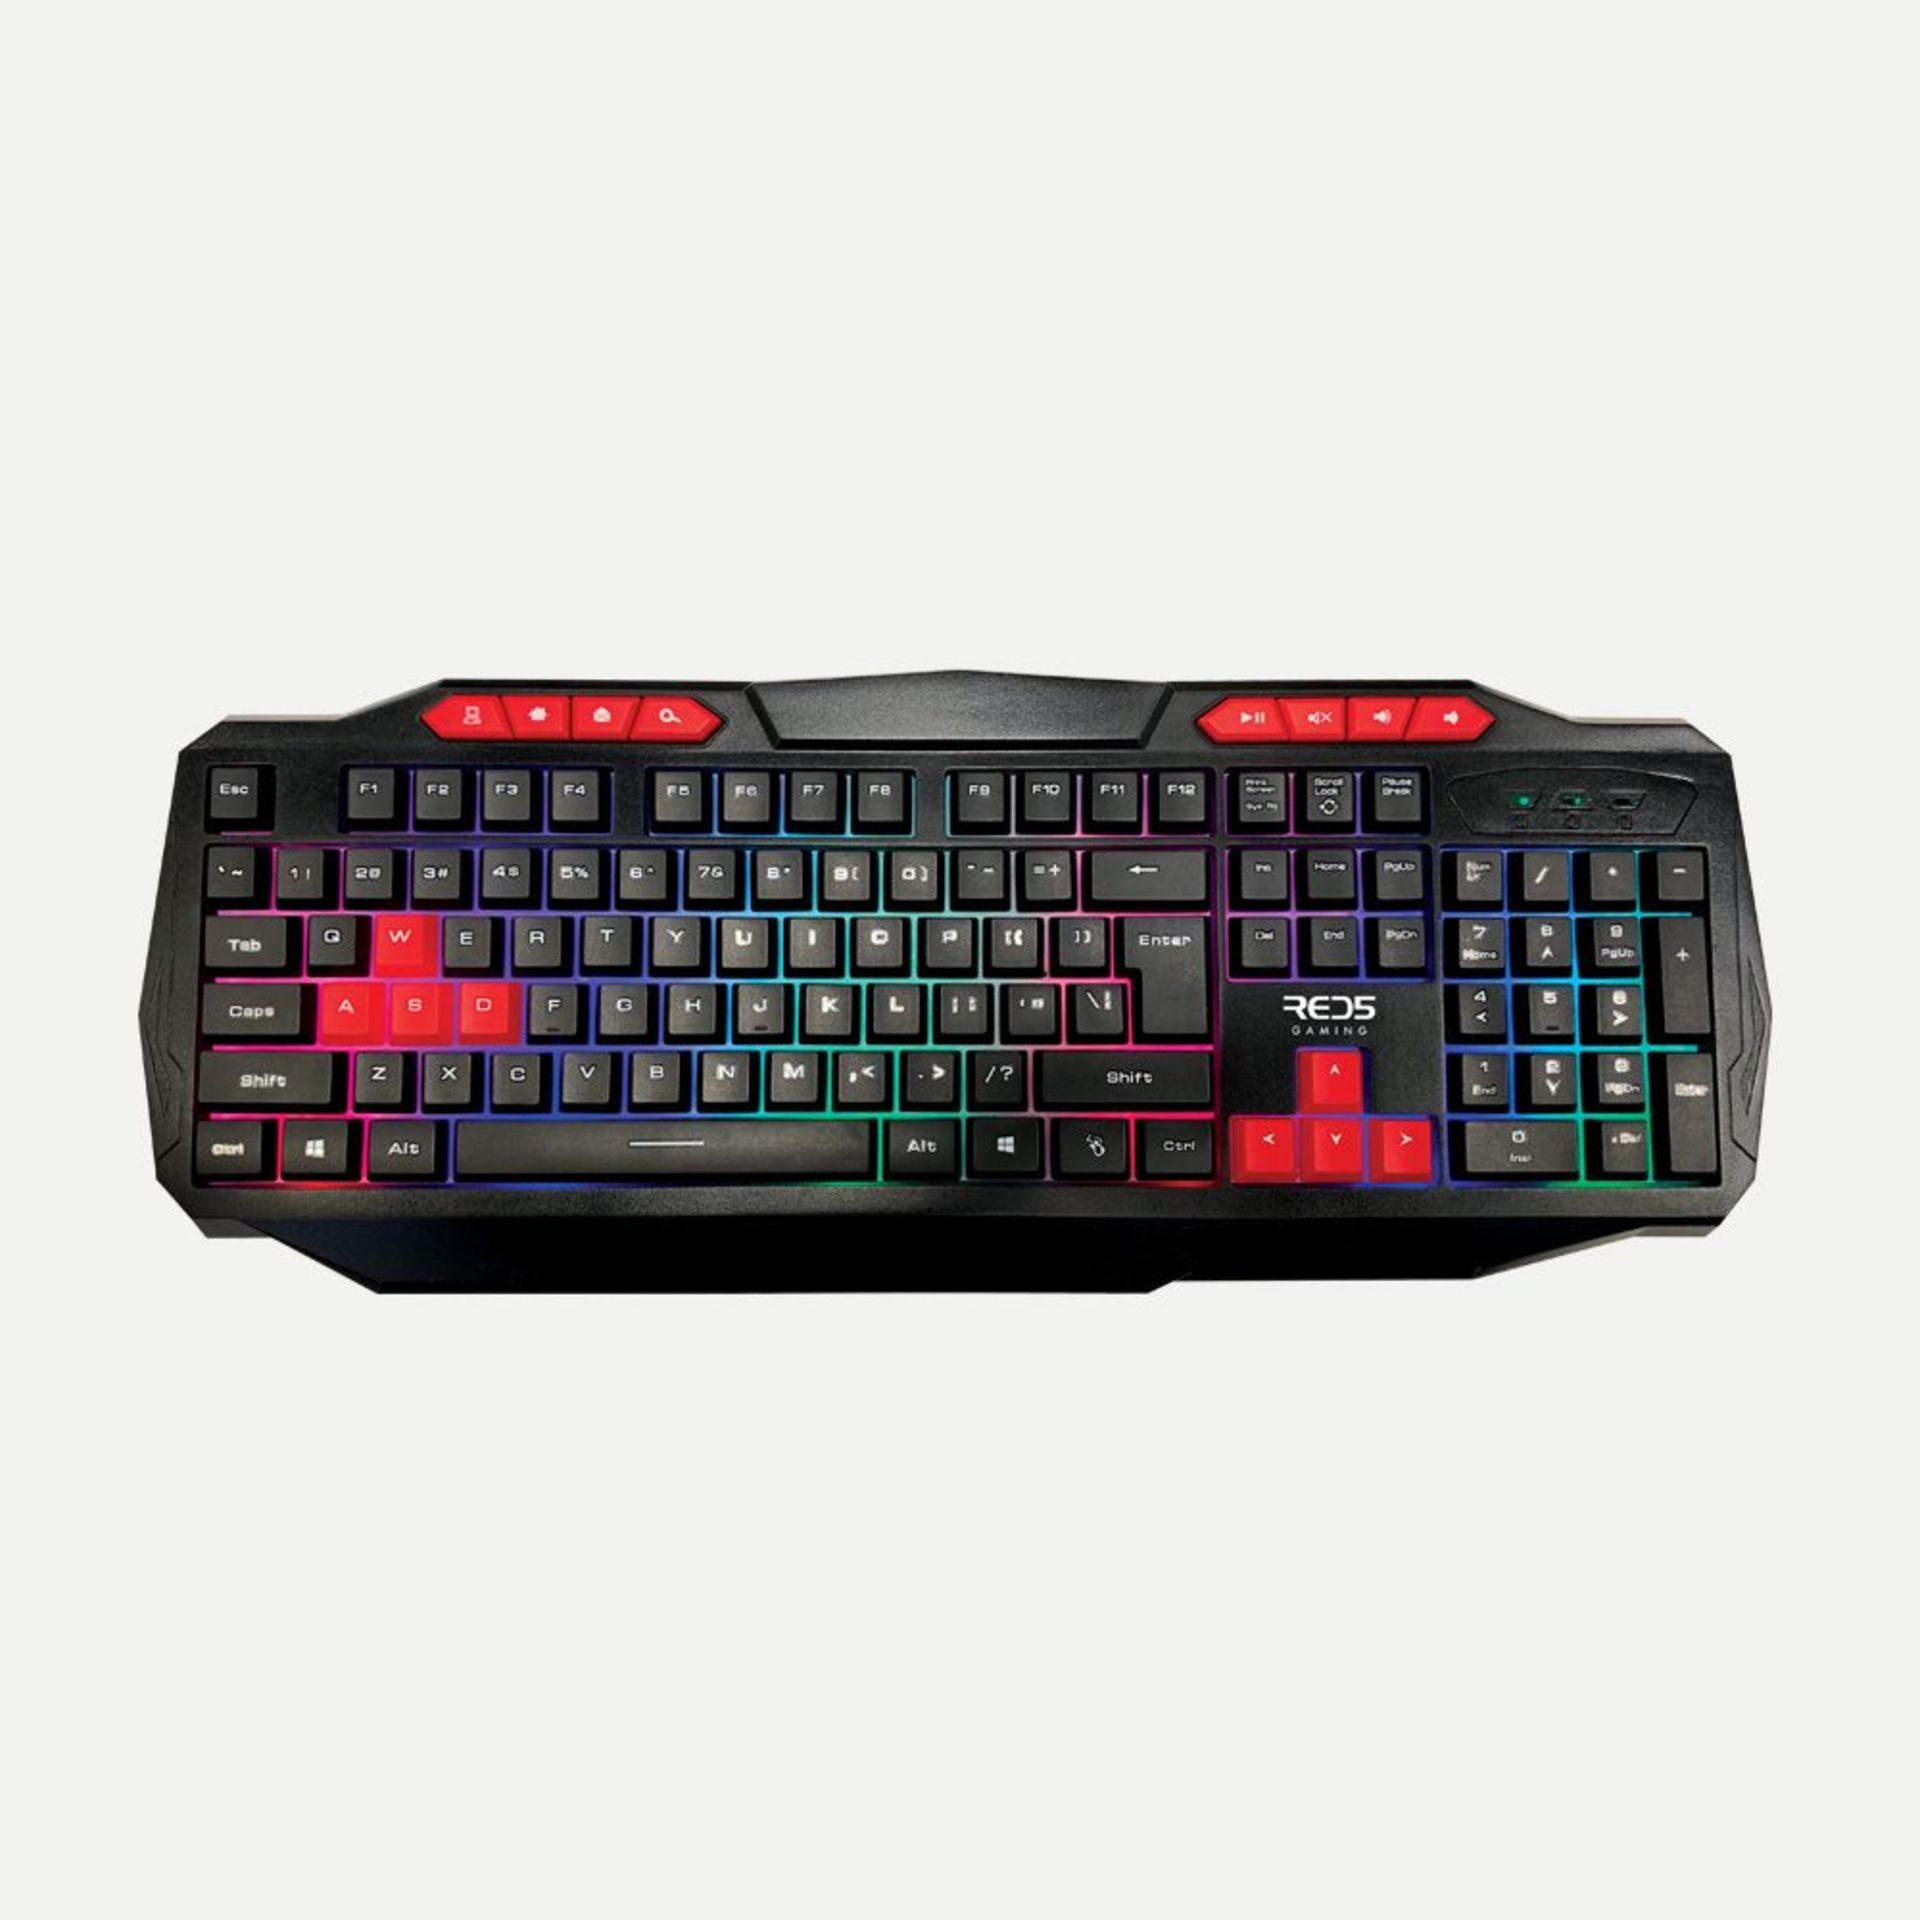 (R2F) 7 Items. 4x Red5 Light Up Gaming Keyboard. 3x Red5 Gaming Mouse (1x Orbit. 1x Nova. 1x Comet)